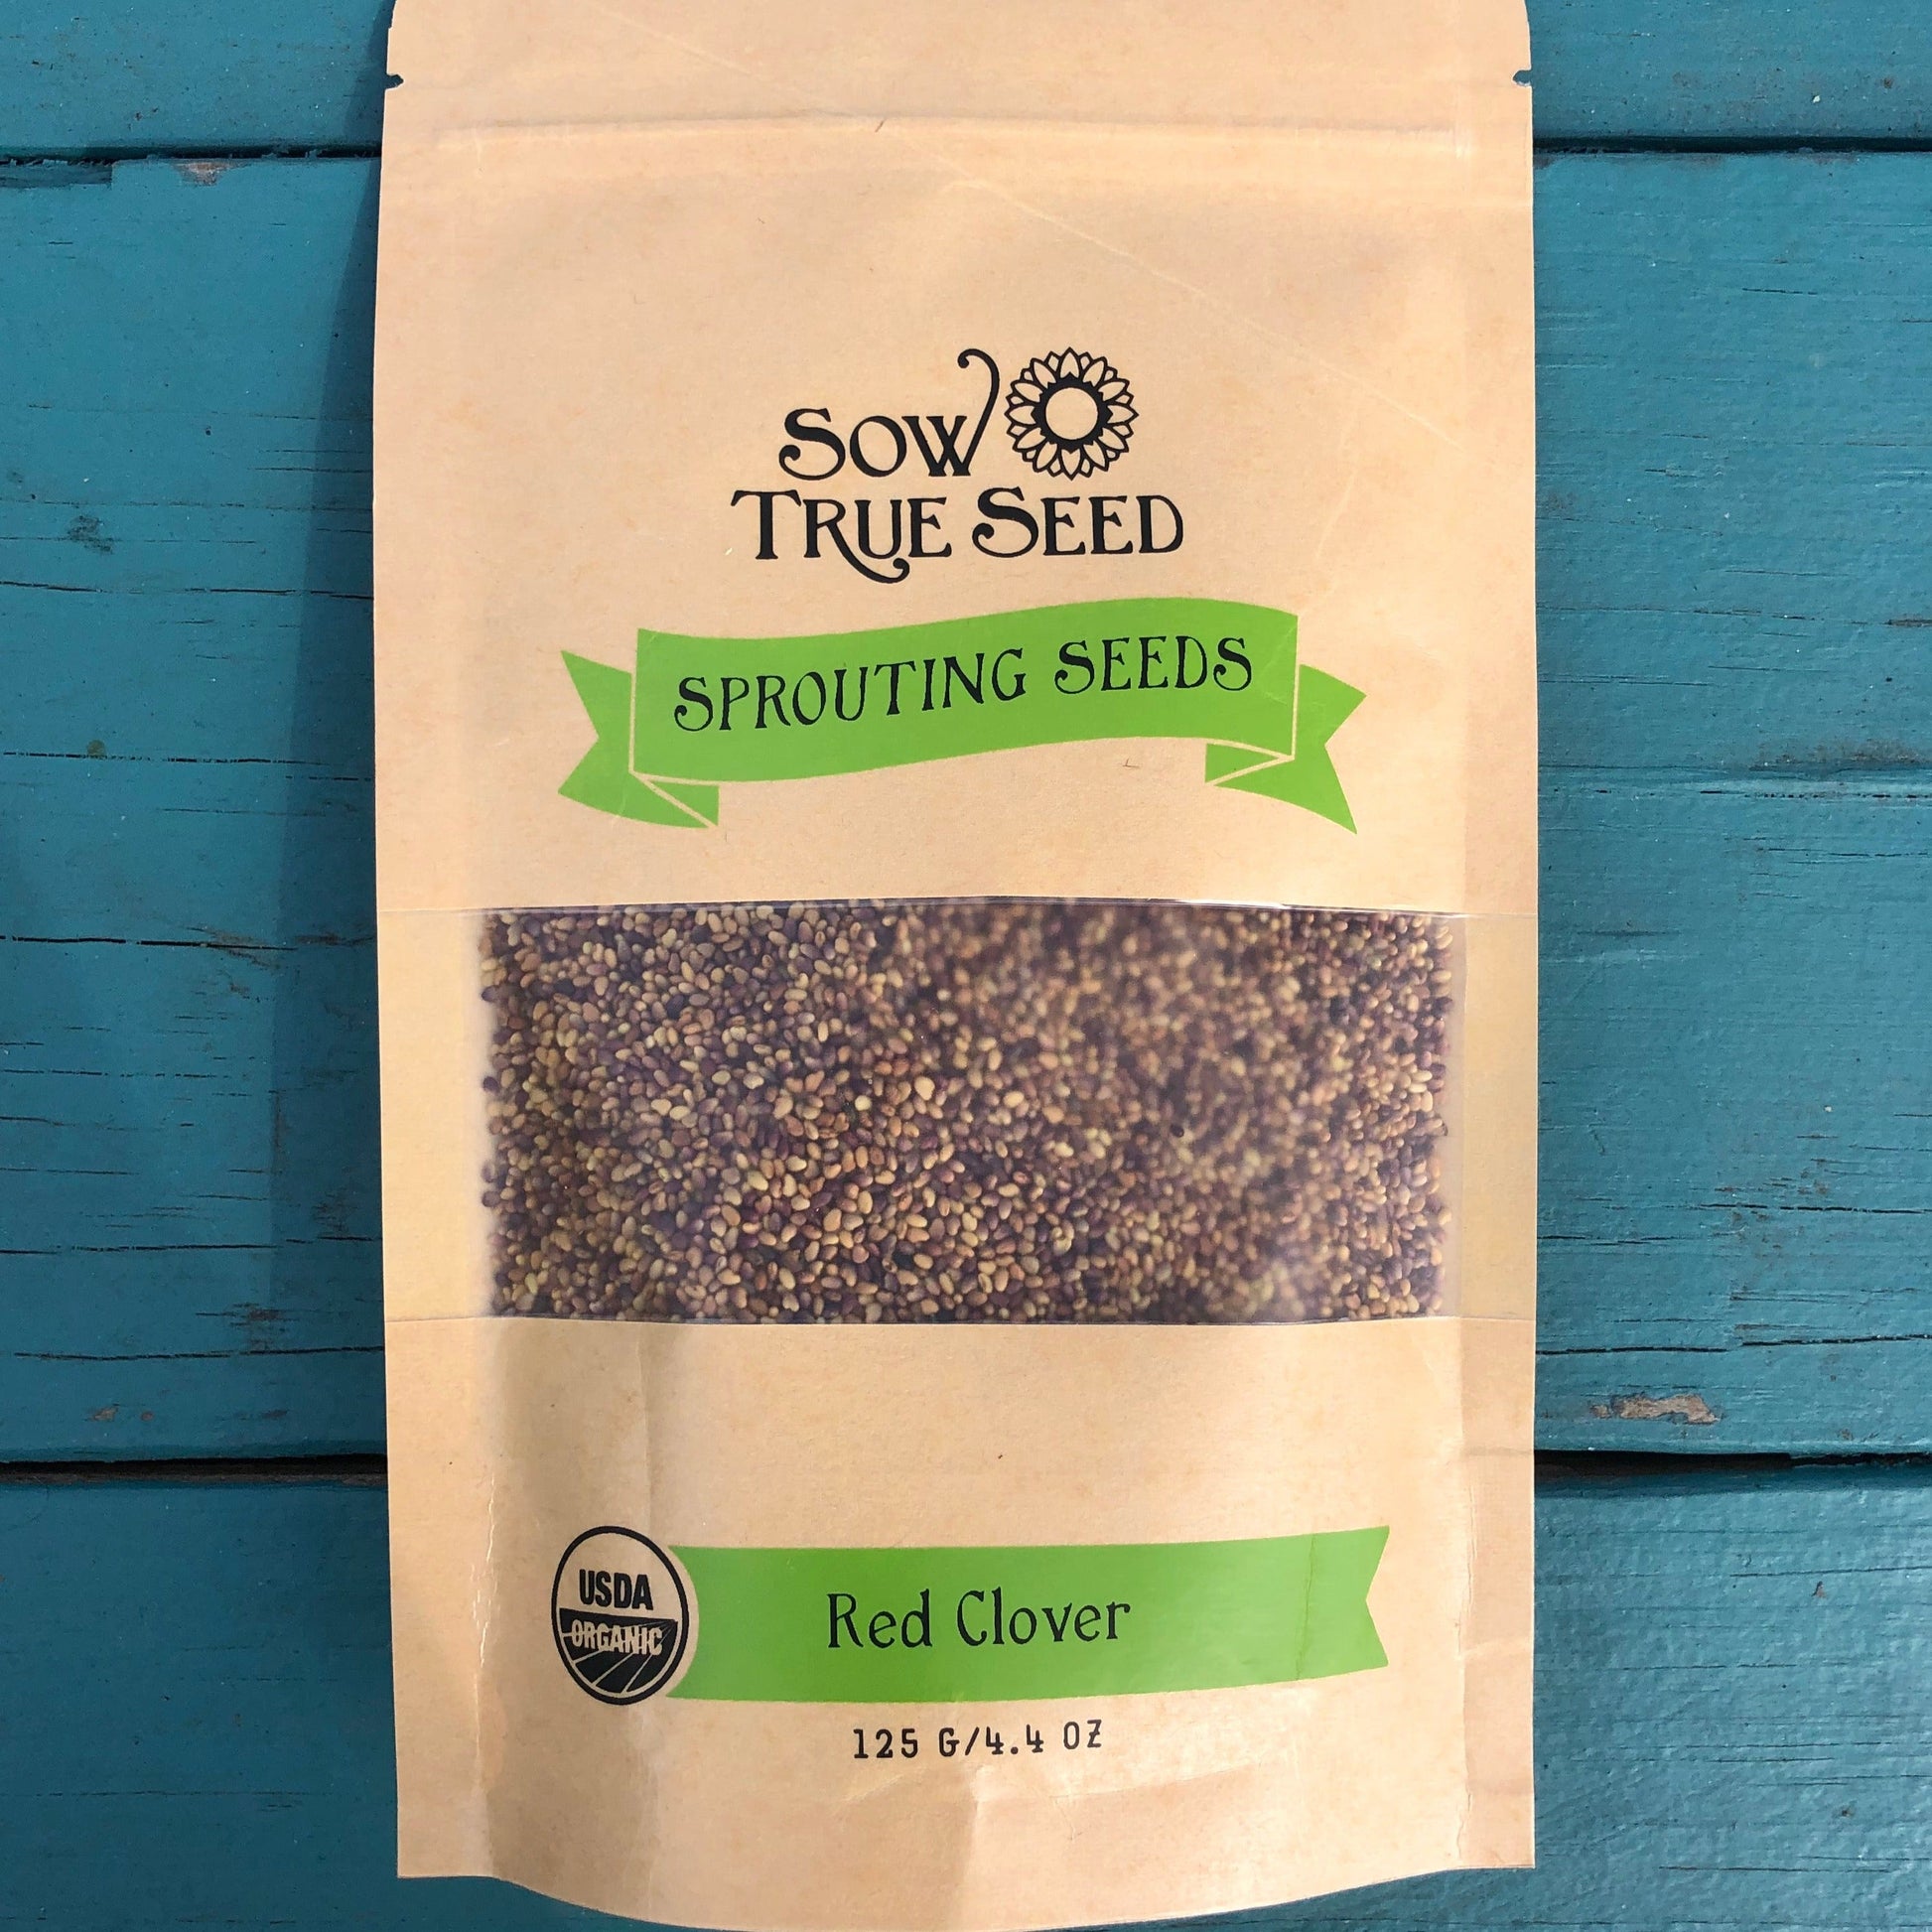 Sprouting Seed - Red Clover, ORGANIC - Sow True Seed